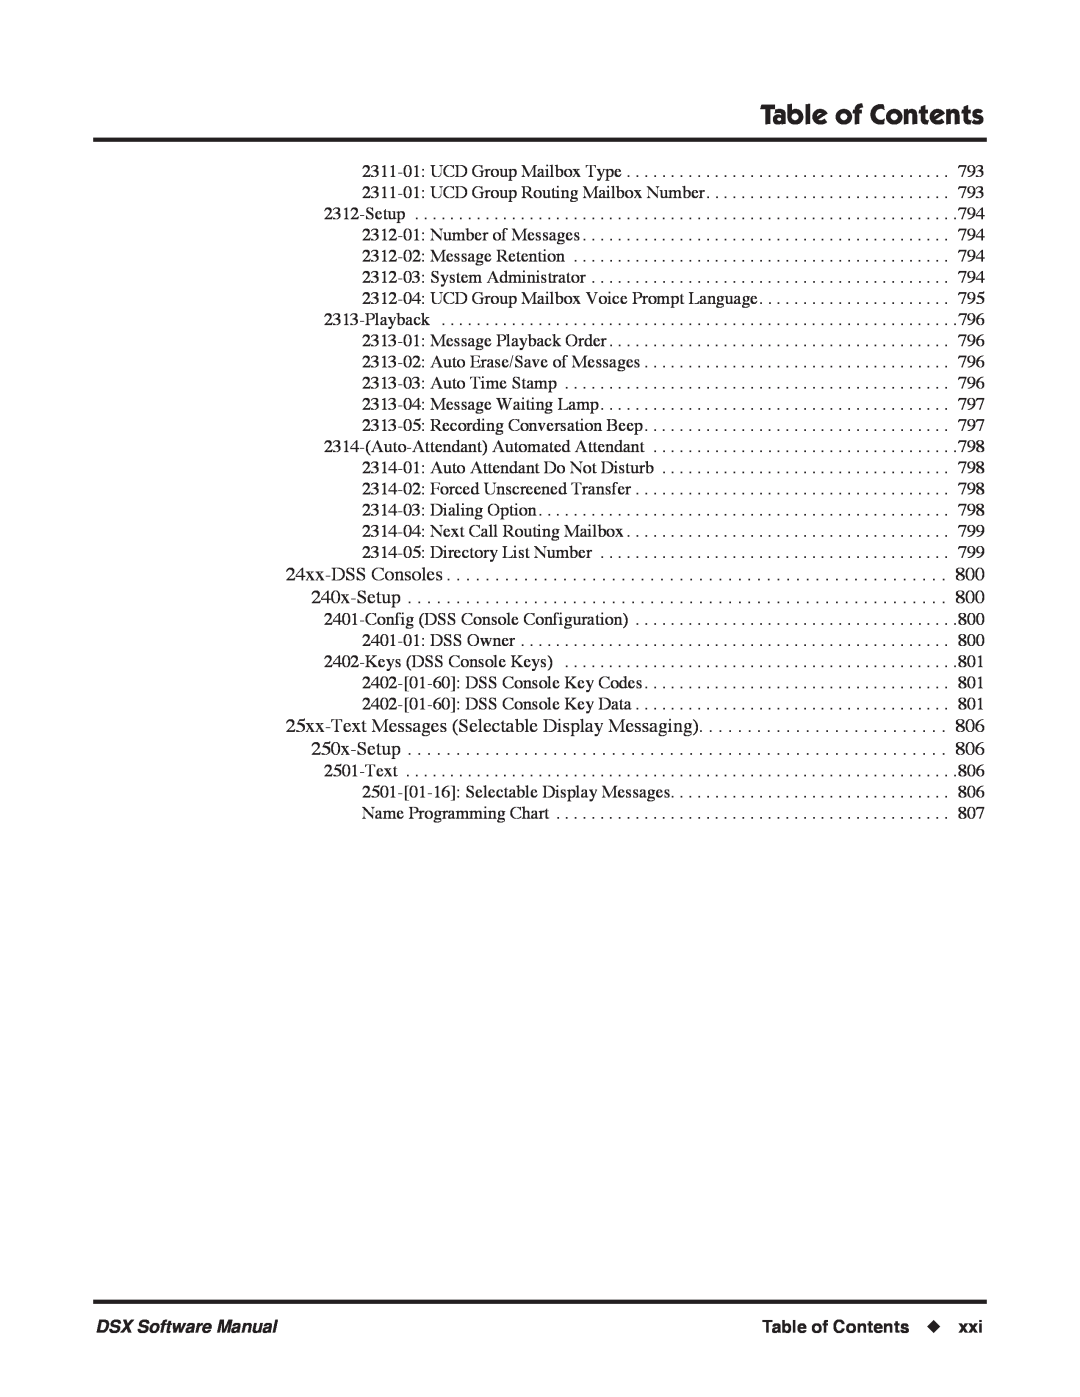 NEC P, N 1093100 software manual Table of Contents, UCD Group Mailbox Type, DSX Software Manual 